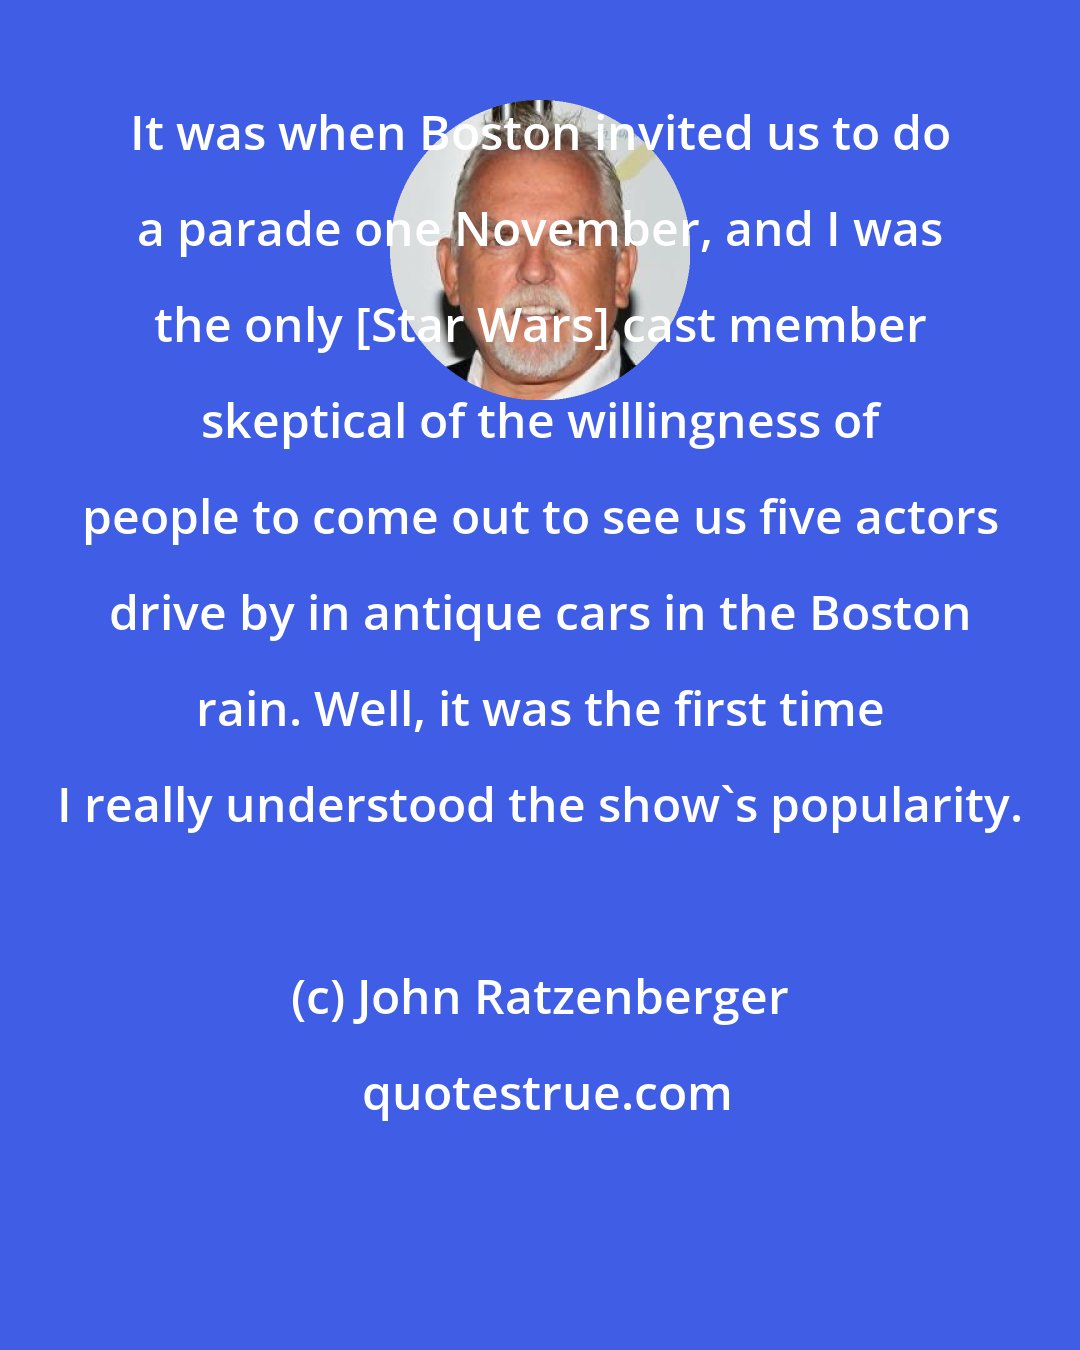 John Ratzenberger: It was when Boston invited us to do a parade one November, and I was the only [Star Wars] cast member skeptical of the willingness of people to come out to see us five actors drive by in antique cars in the Boston rain. Well, it was the first time I really understood the show's popularity.